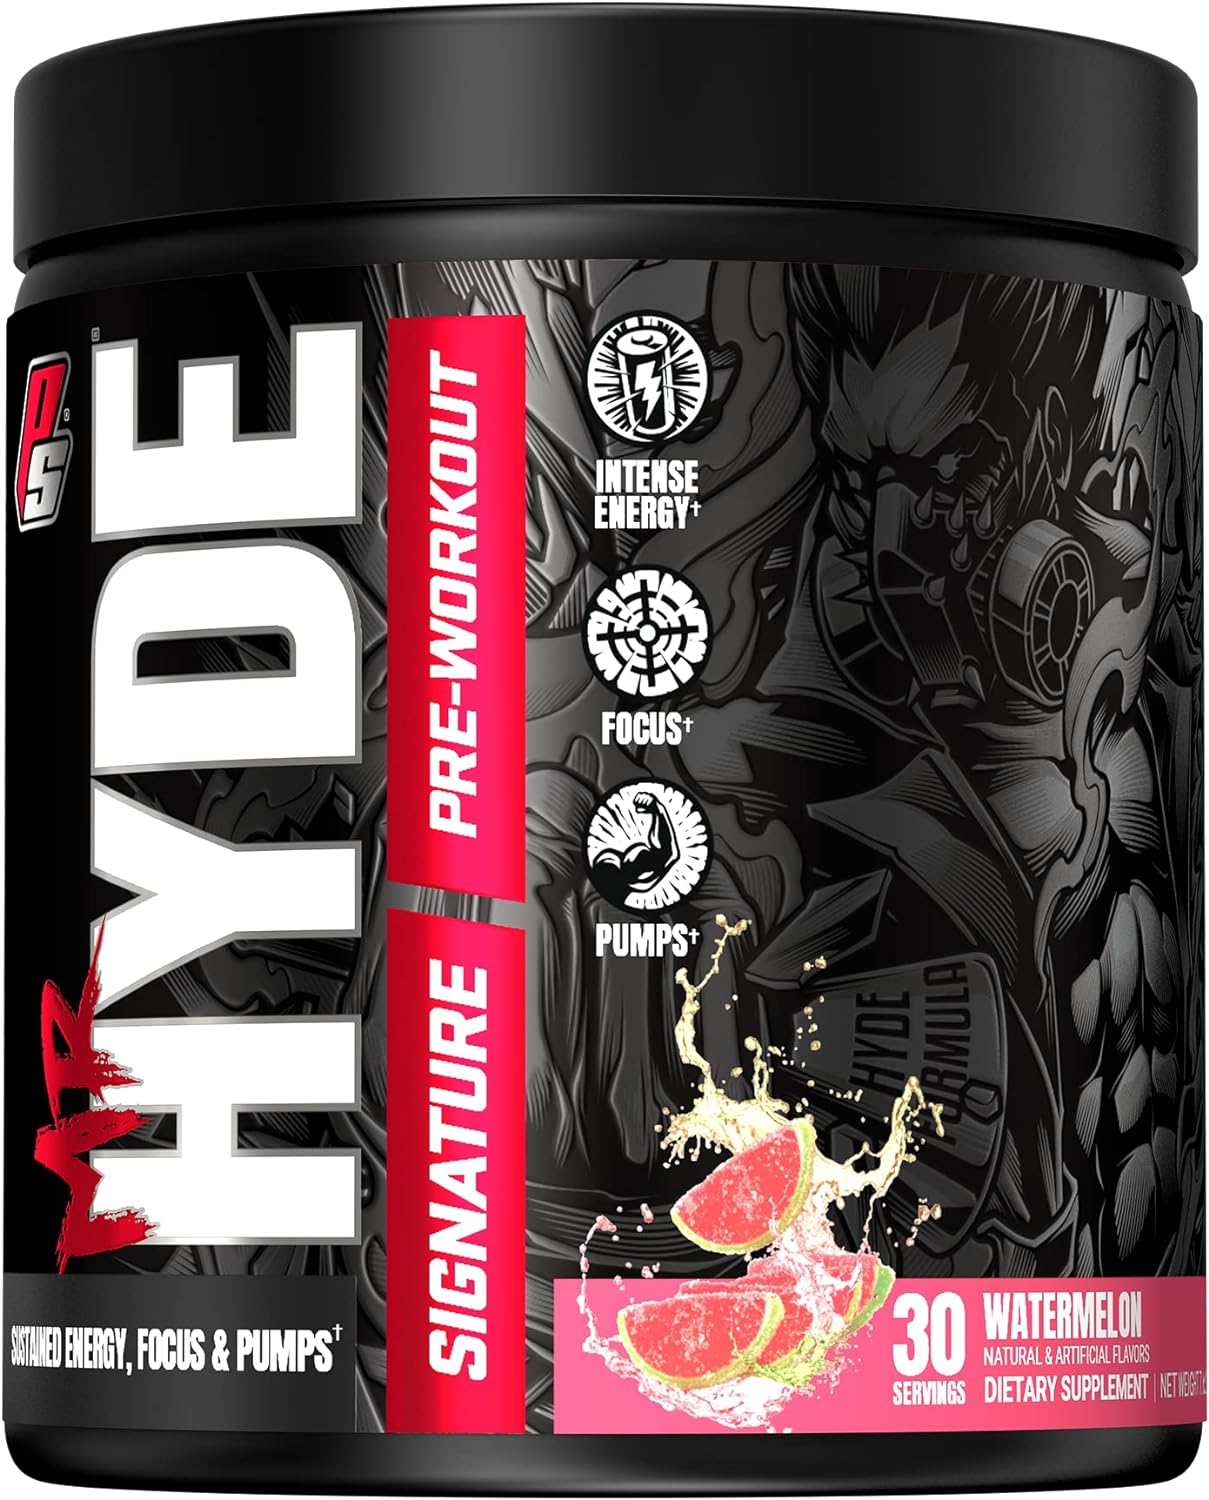 PROSUPPS Mr. Hyde Signature Series Pre-Workout Energy Drink – Intense Sustained Energy, Focus  Pumps with Beta Alanine, Creatine, Nitrosigine  TeaCrine (30 Servings Watermelon)